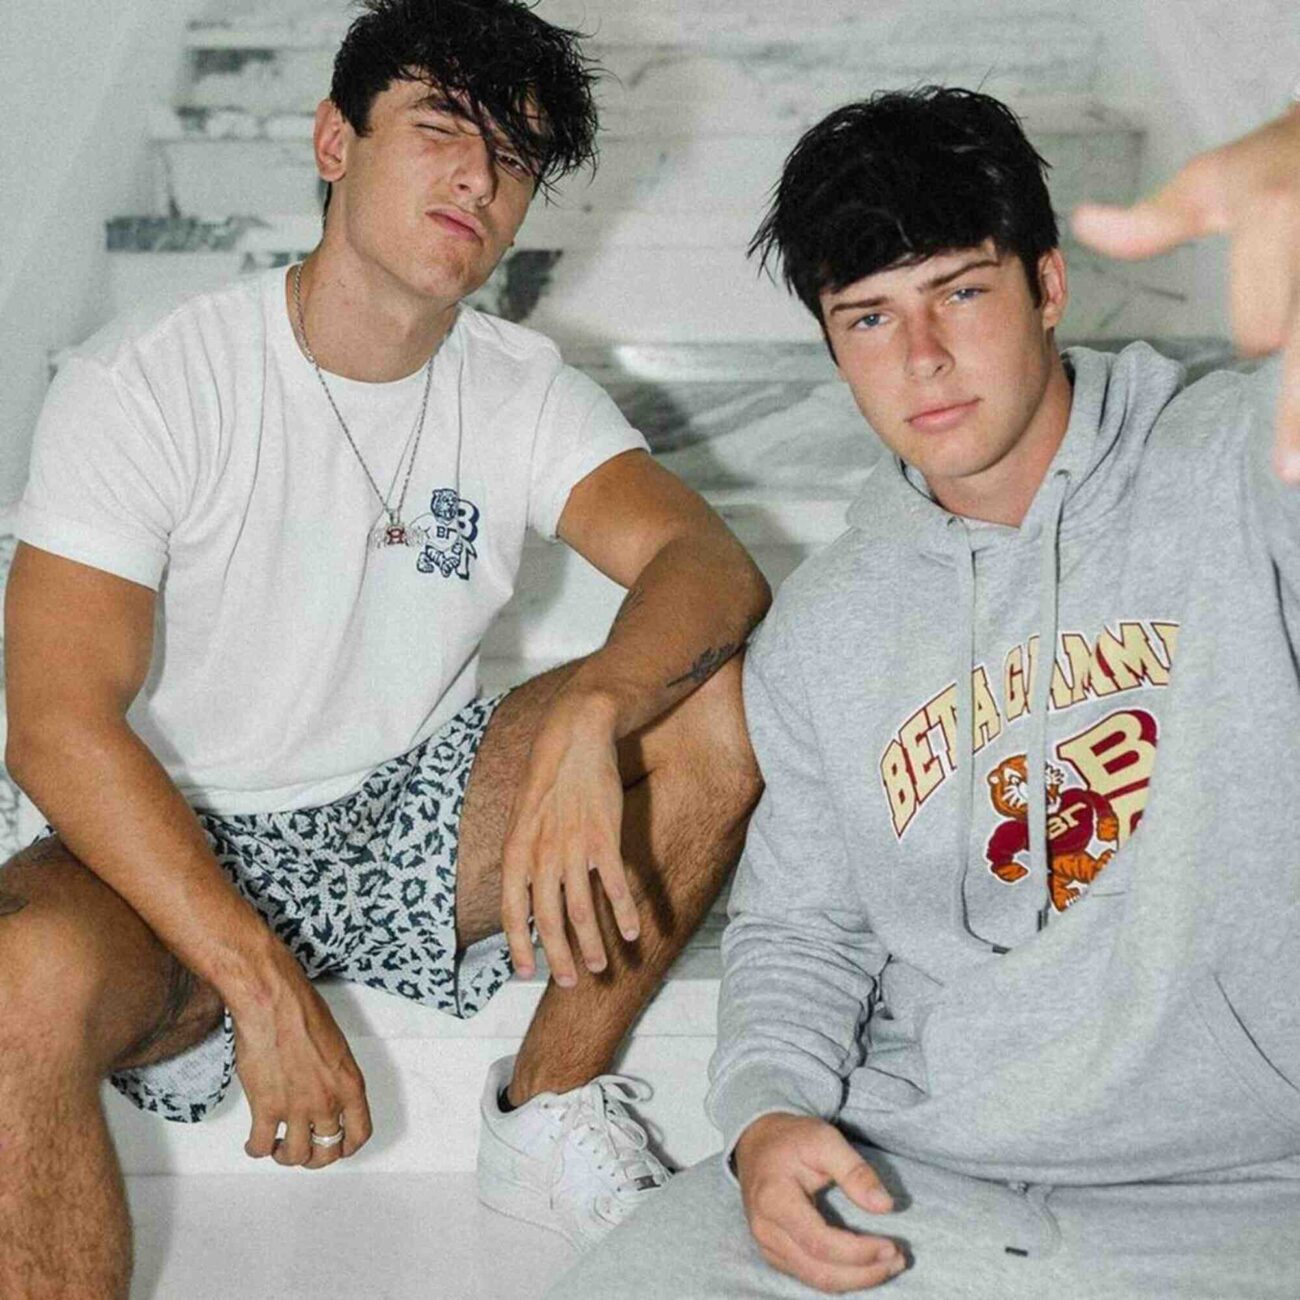 It seems like TikTok stars Bryce Hall and Blake Gray may have to start making their content while. . . behind bars? Here's why.